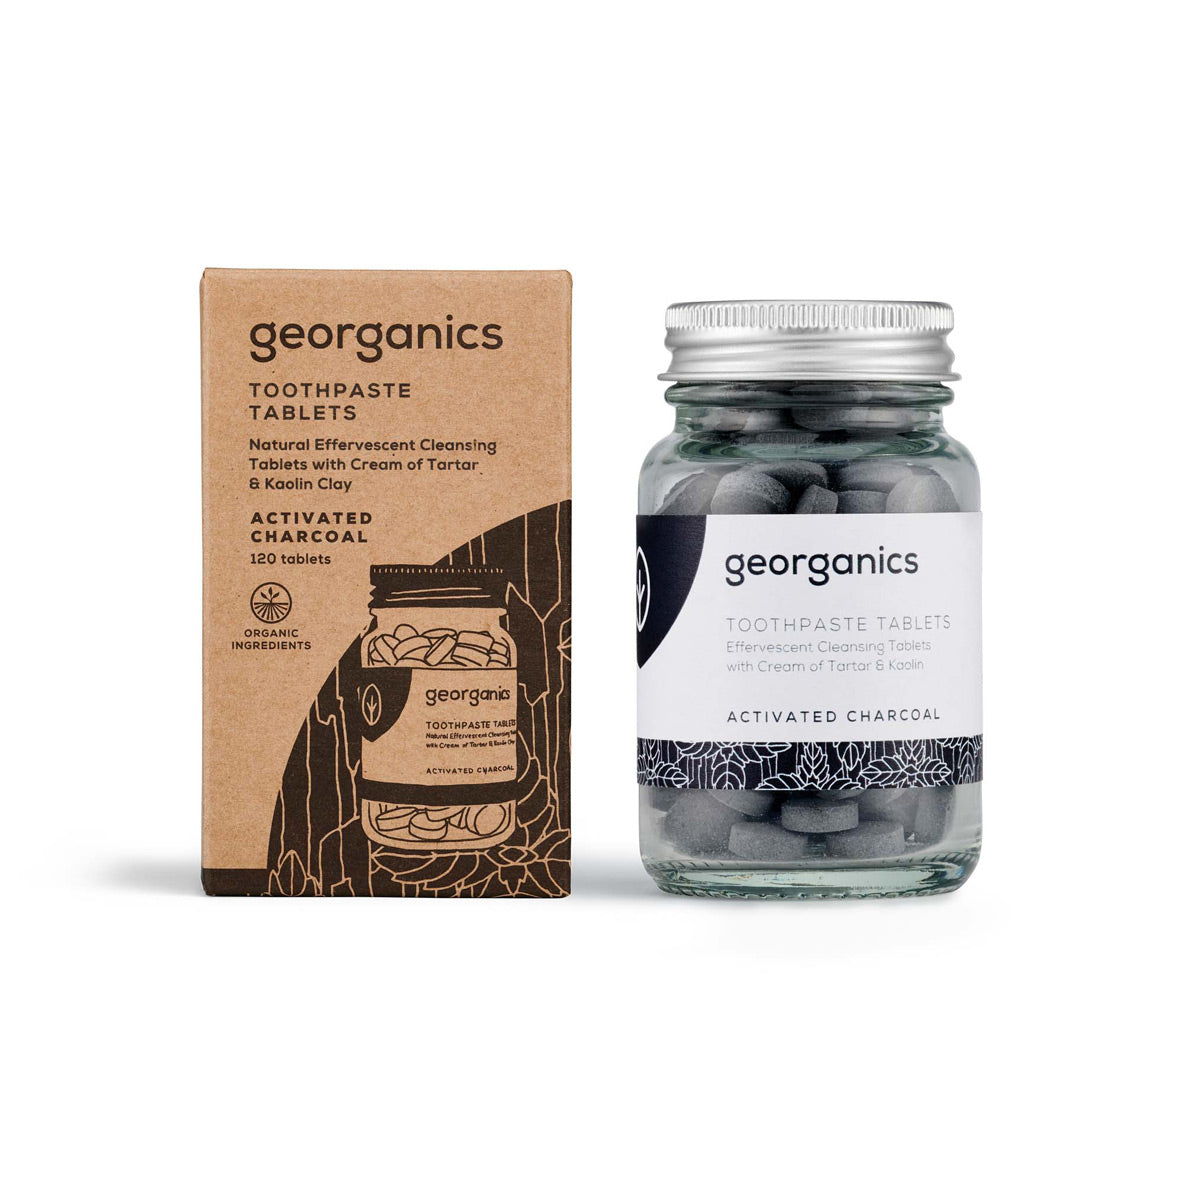 Georganics Toothpaste Tablets Activated Charcoal with Packaging